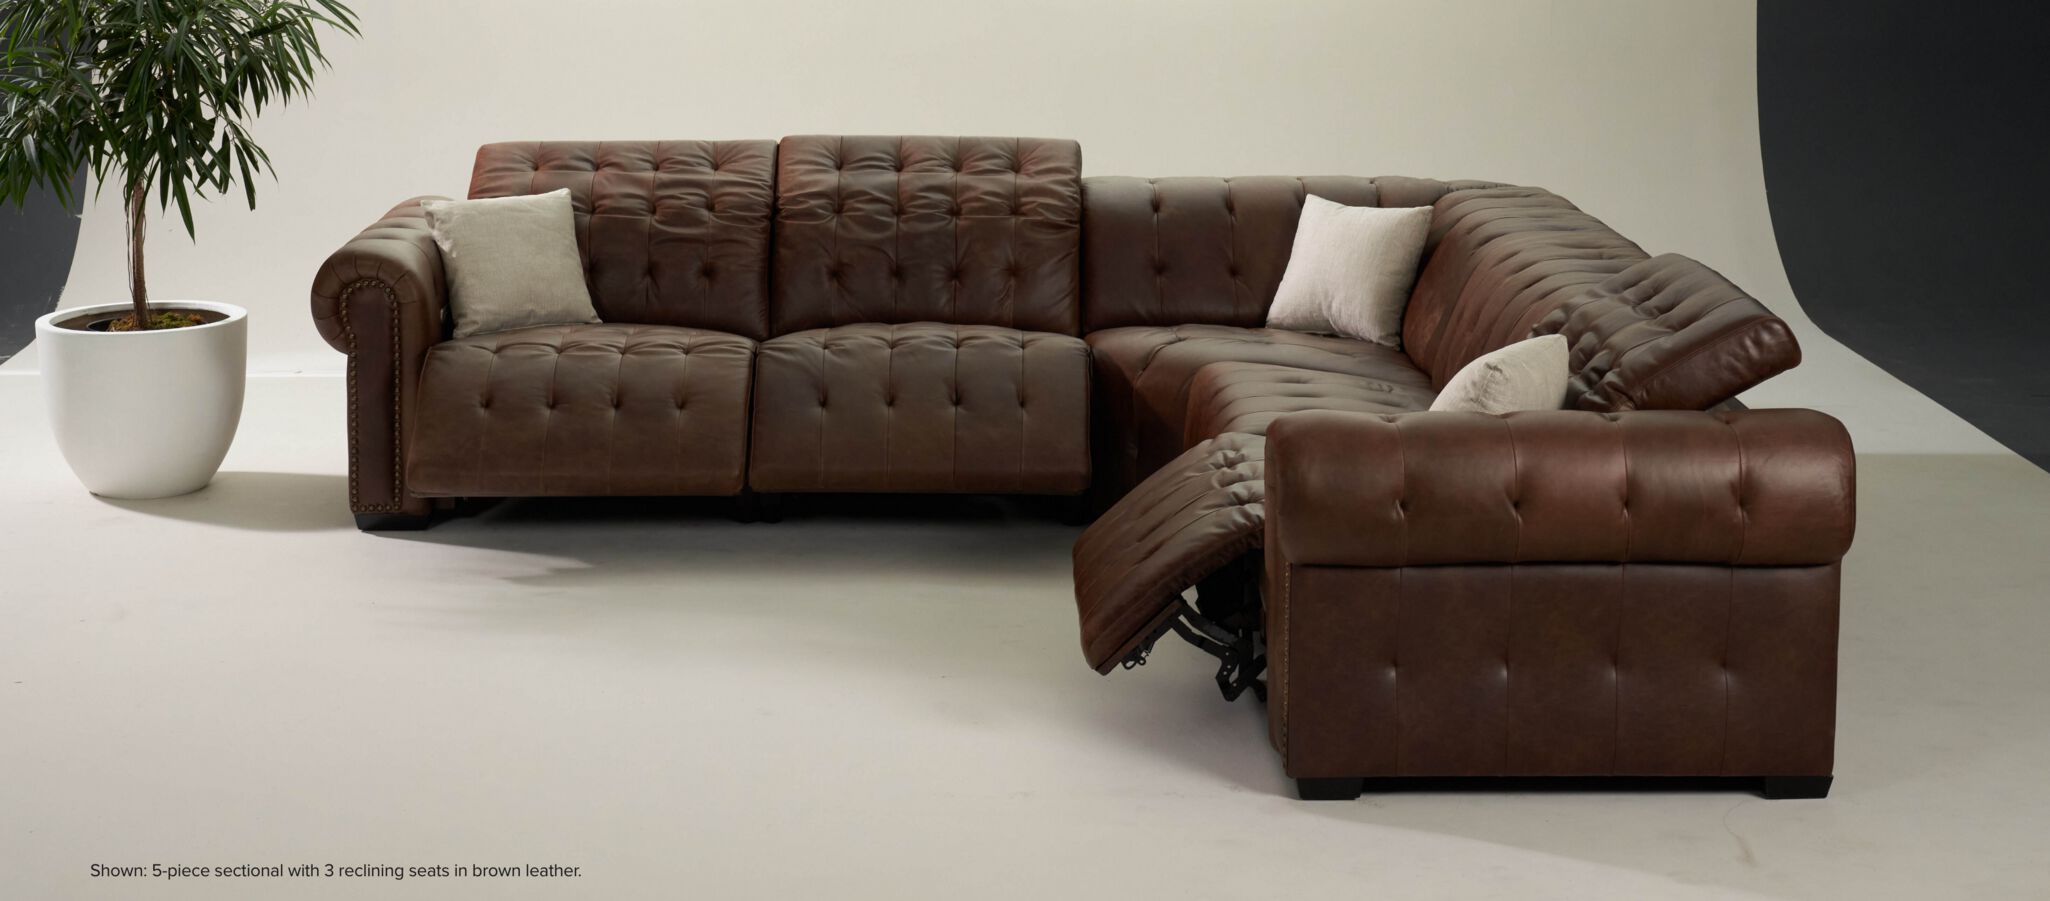 Comfortech Reclining Collections